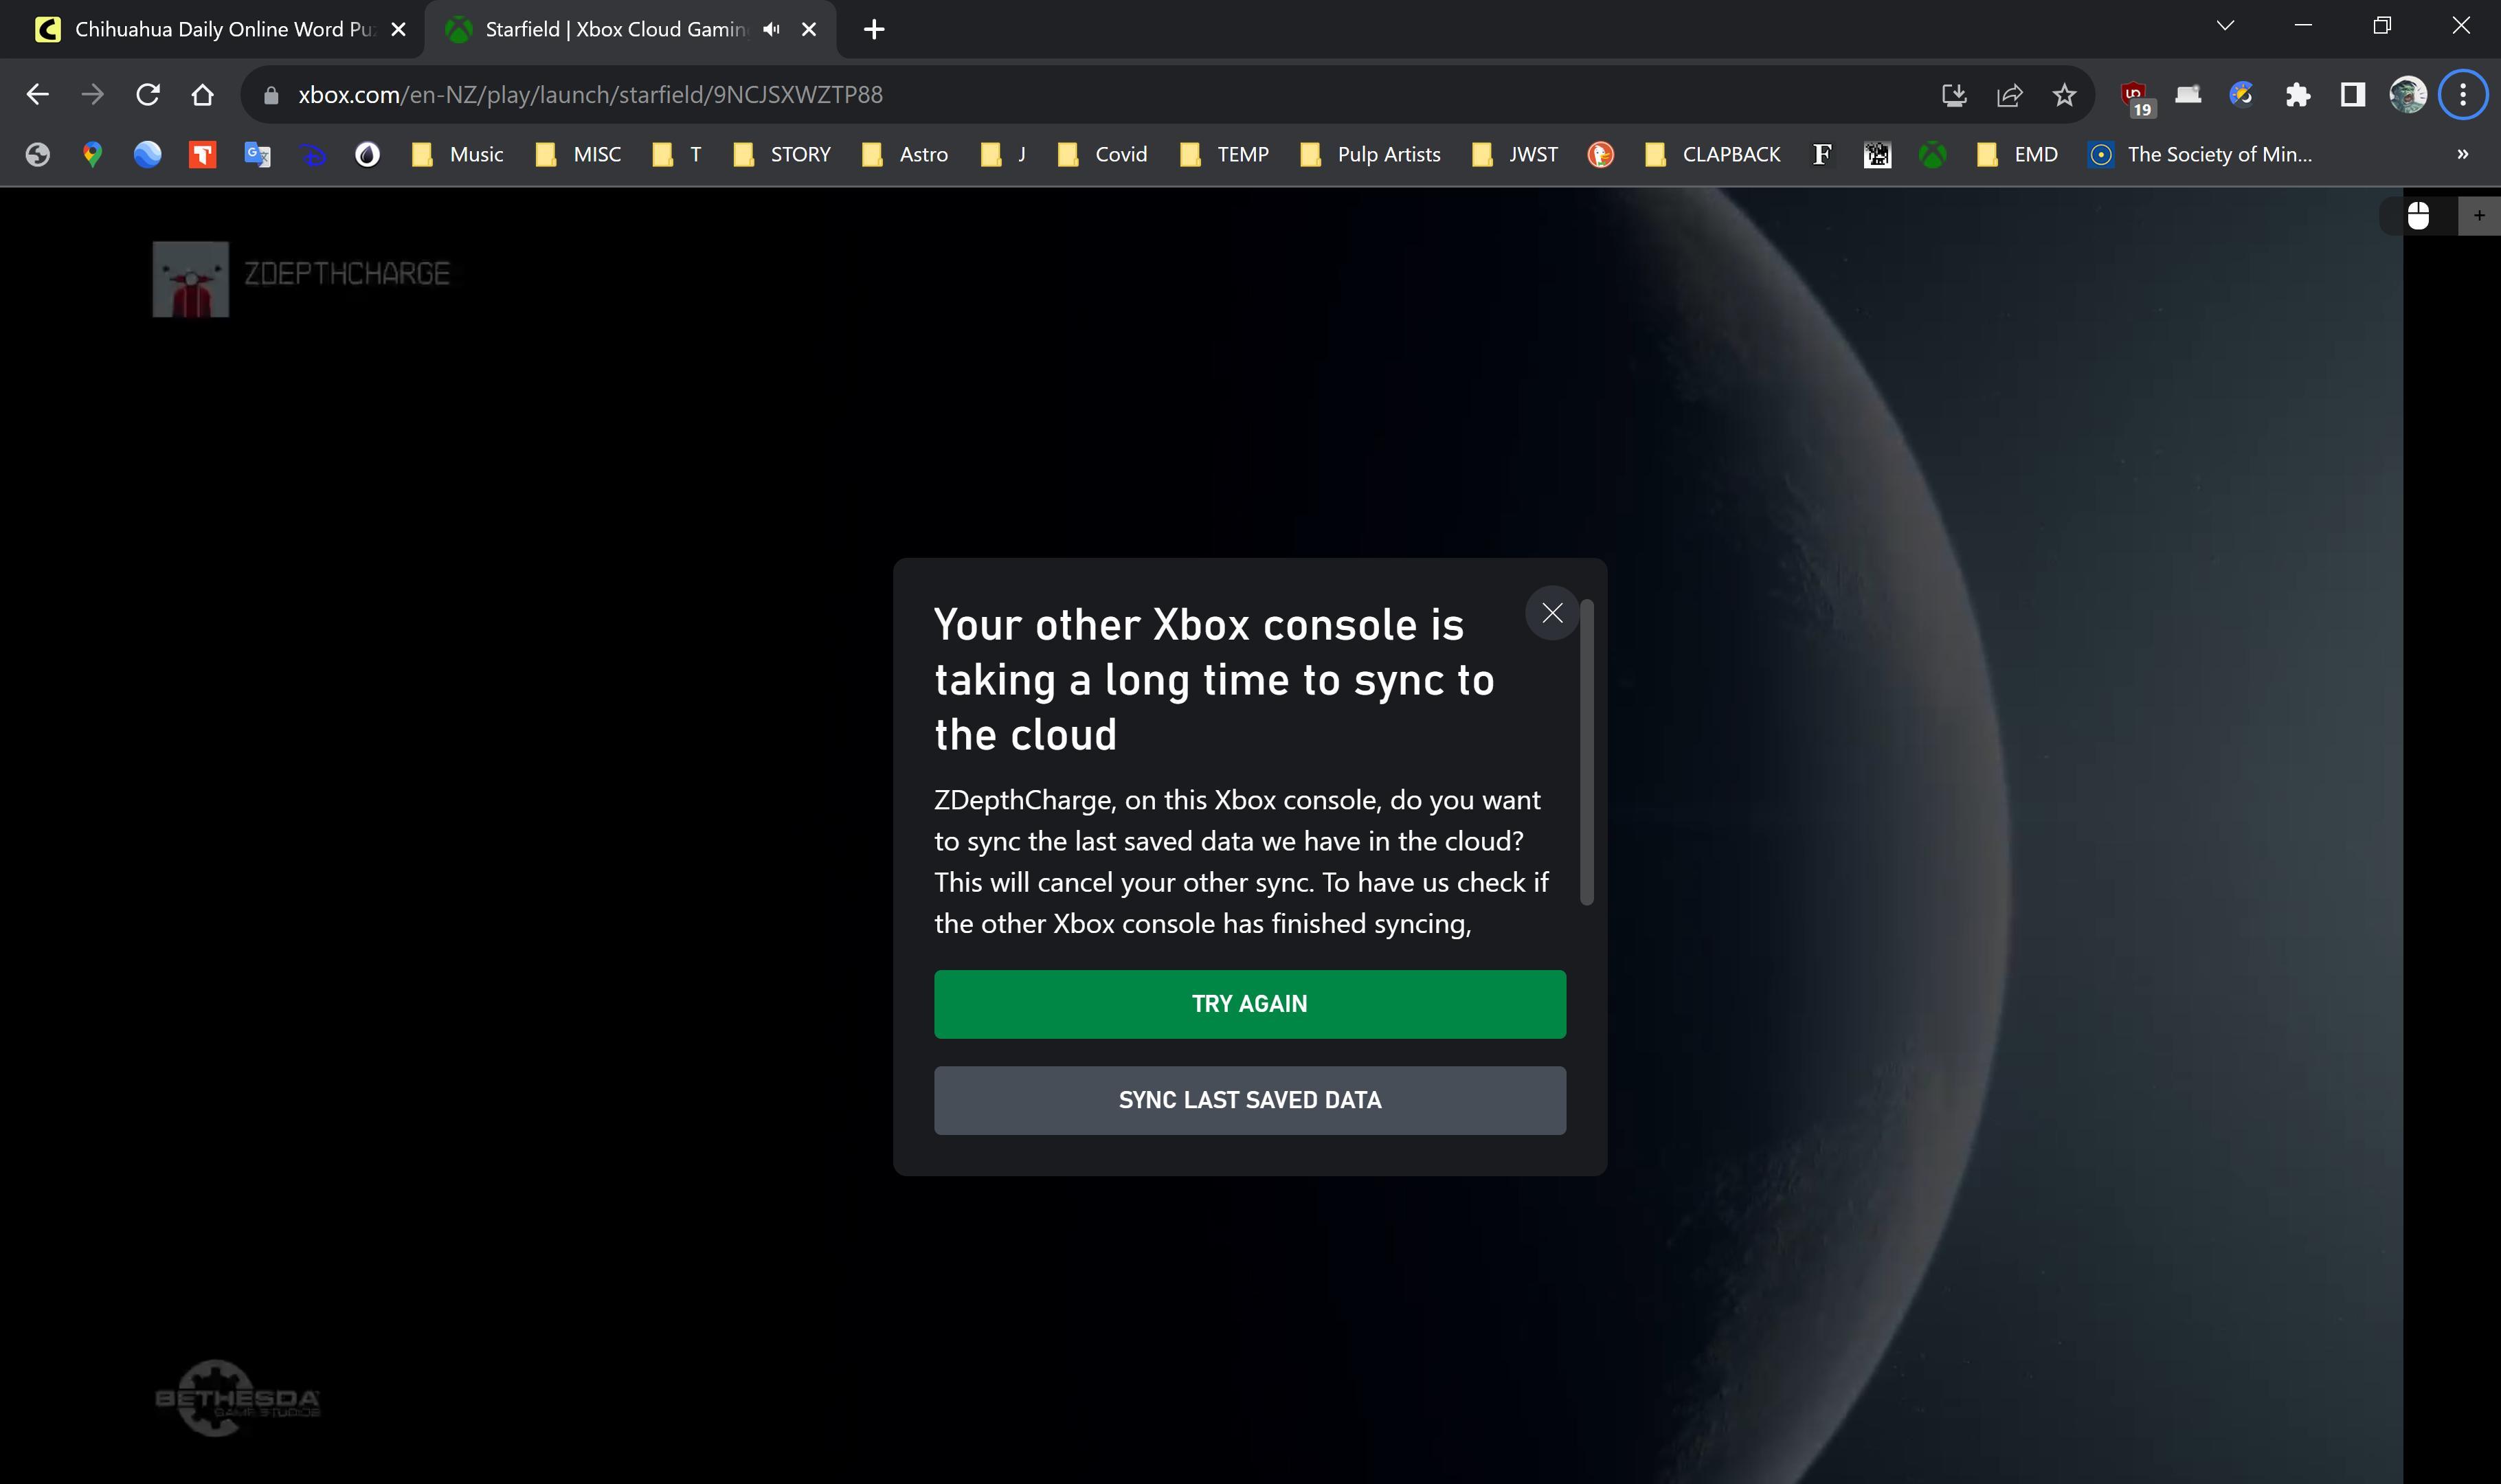 Microsoft has paused the Game Pass trial offer ahead of Starfield launch